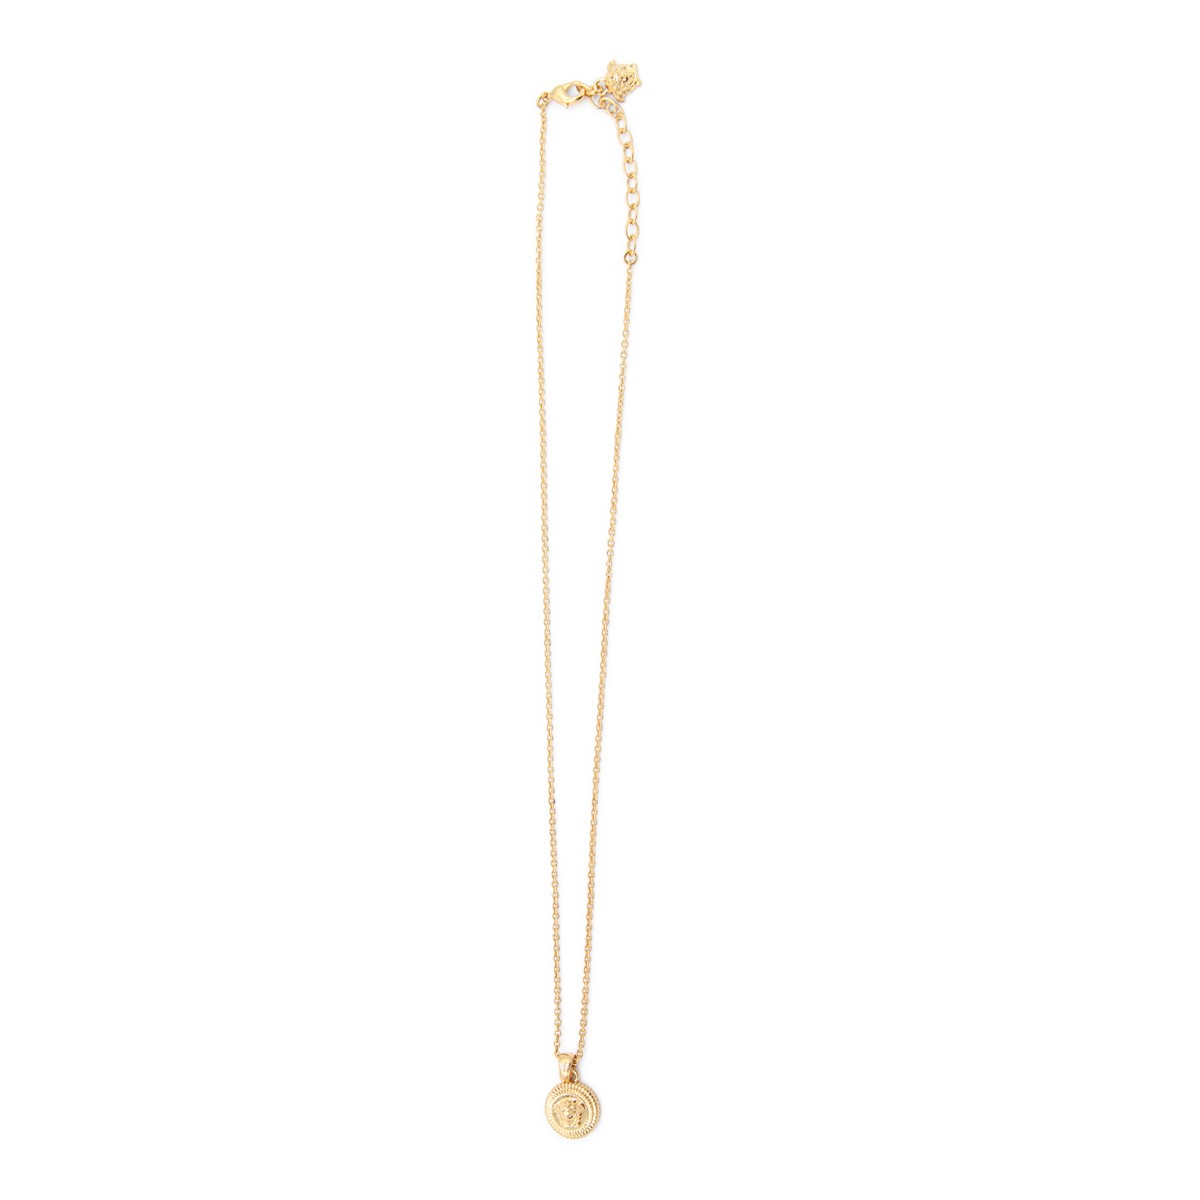 GOLD-TONE BRASS NECKLACE